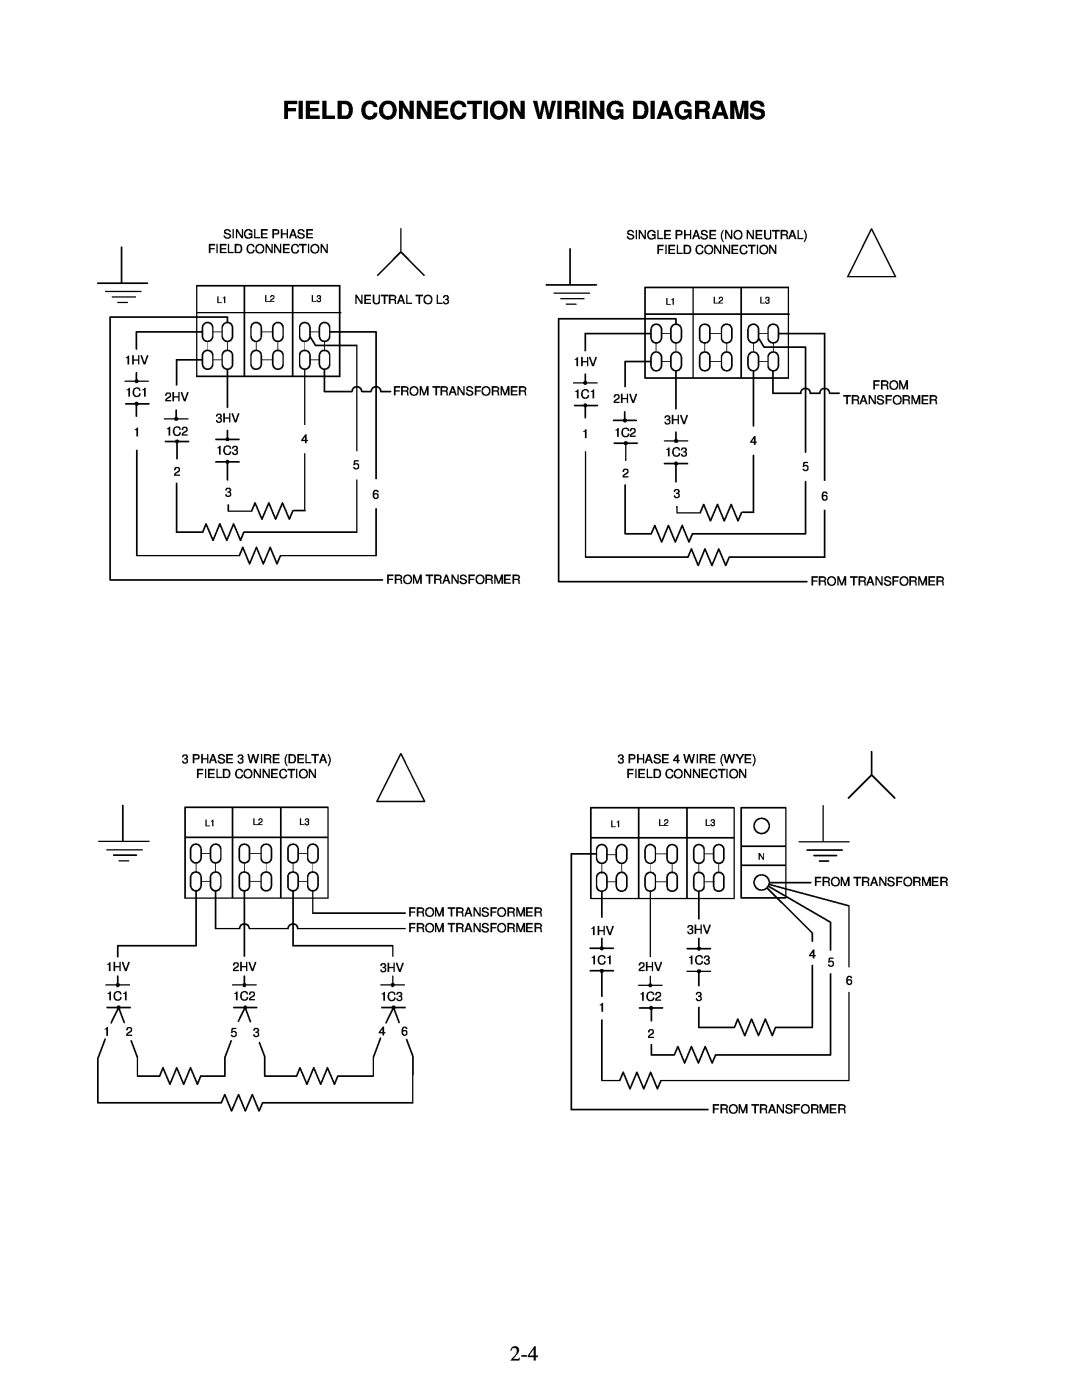 Frymaster 8SMS, 8BC, 8C manual Field Connection Wiring Diagrams 